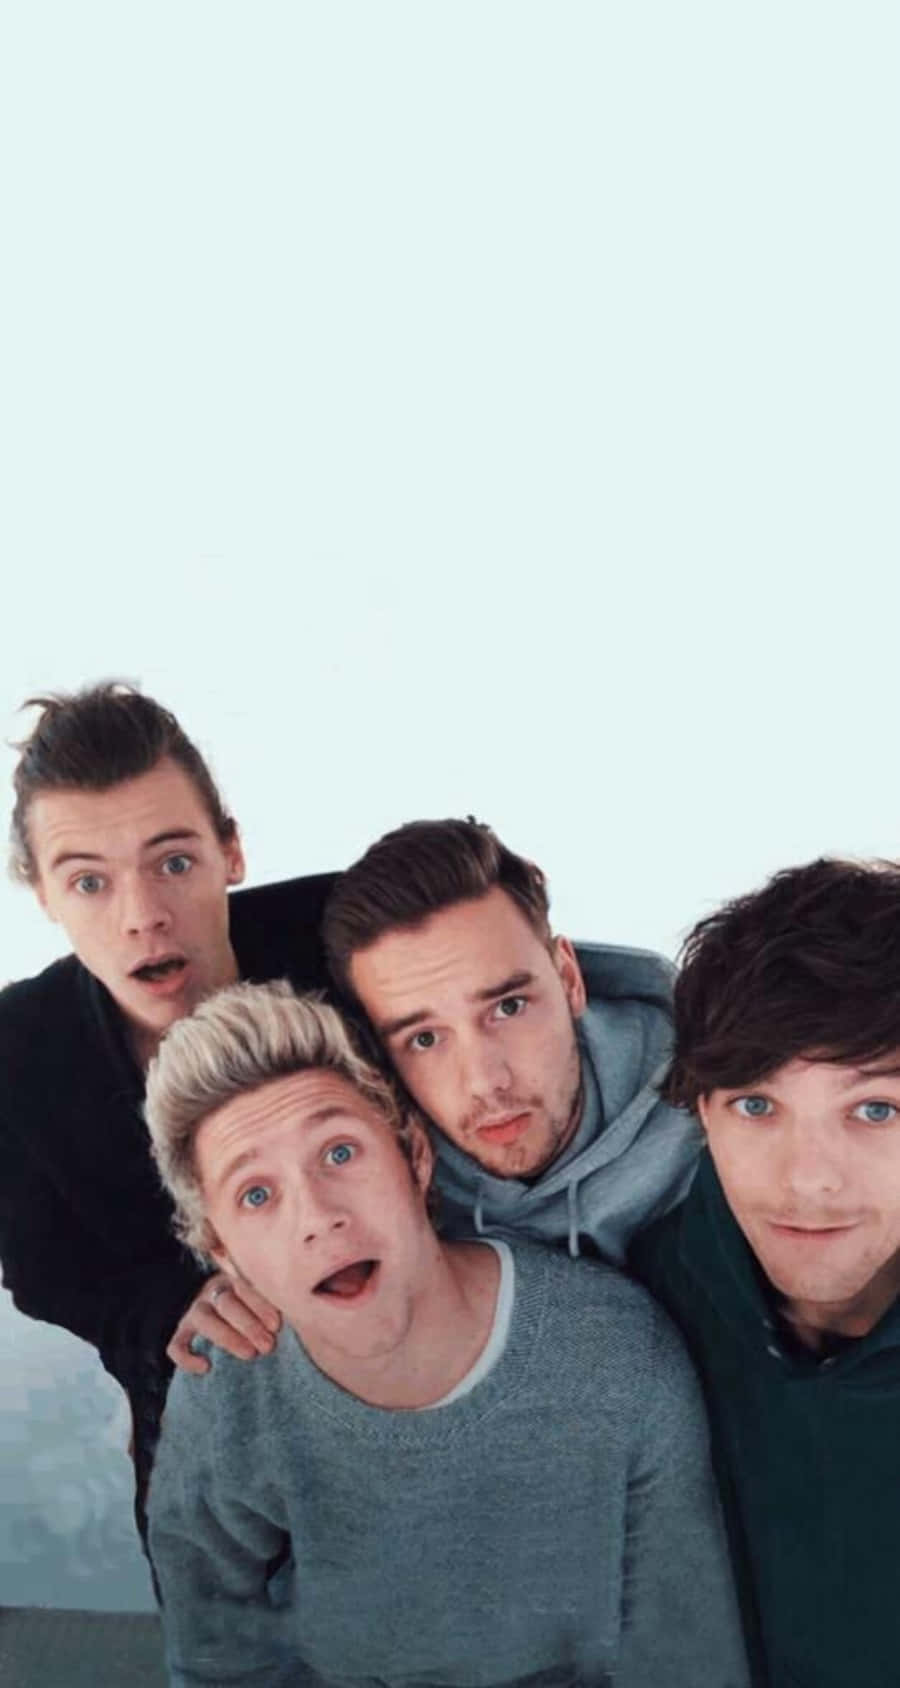 Download Pastel Blue 1 Direction Iphone Wallpaper | Wallpapers.com